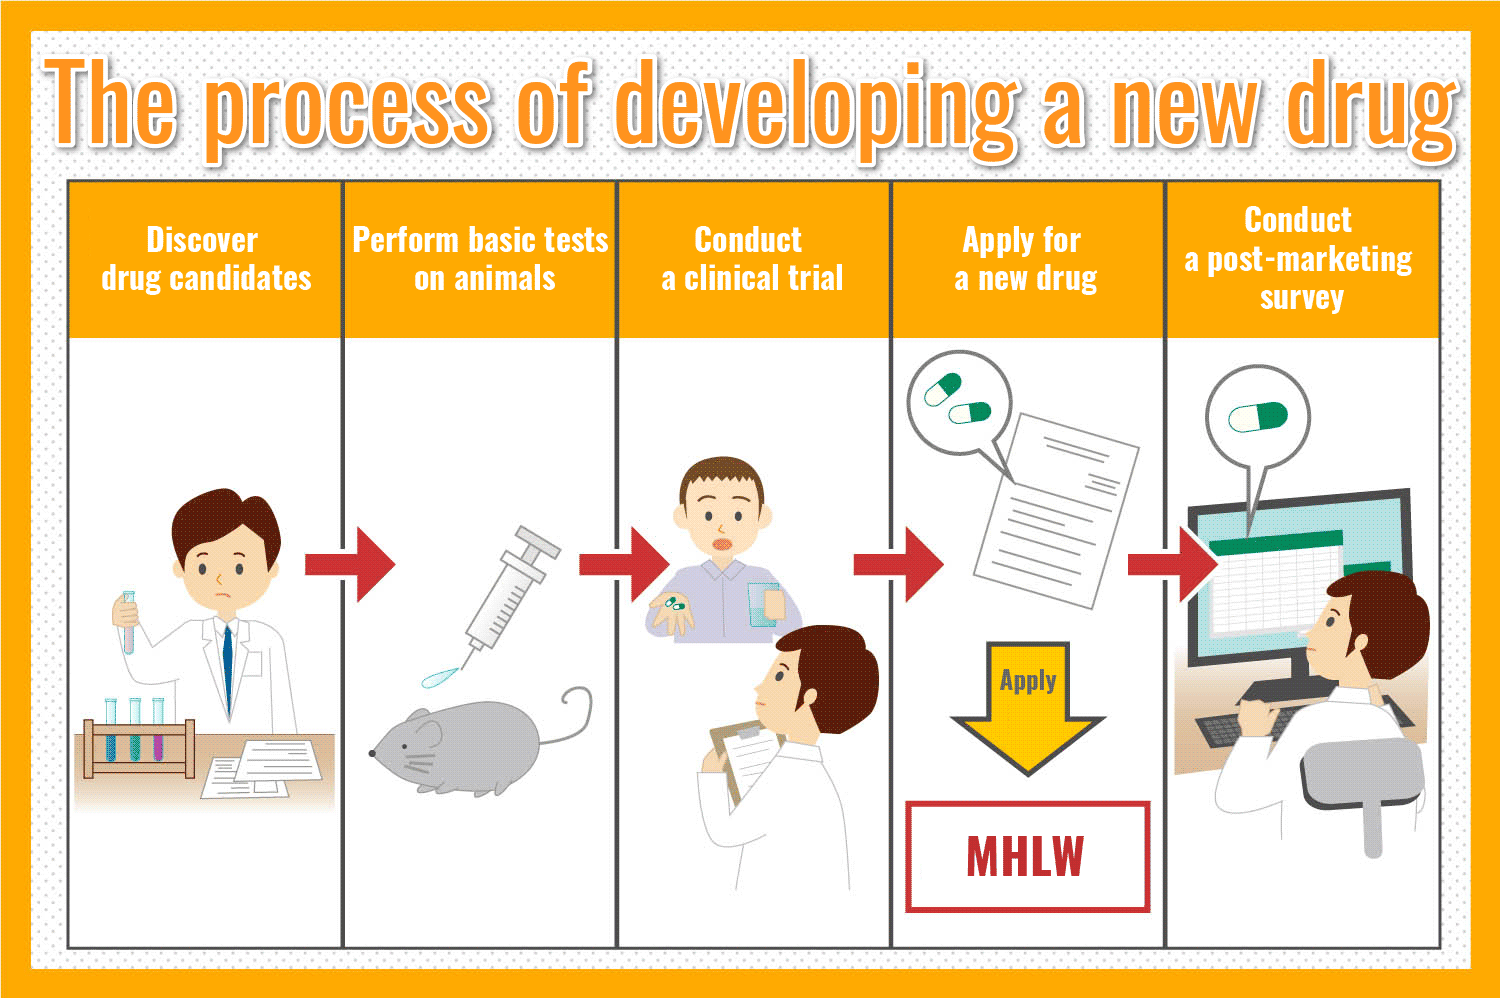 The process of developing a new drug